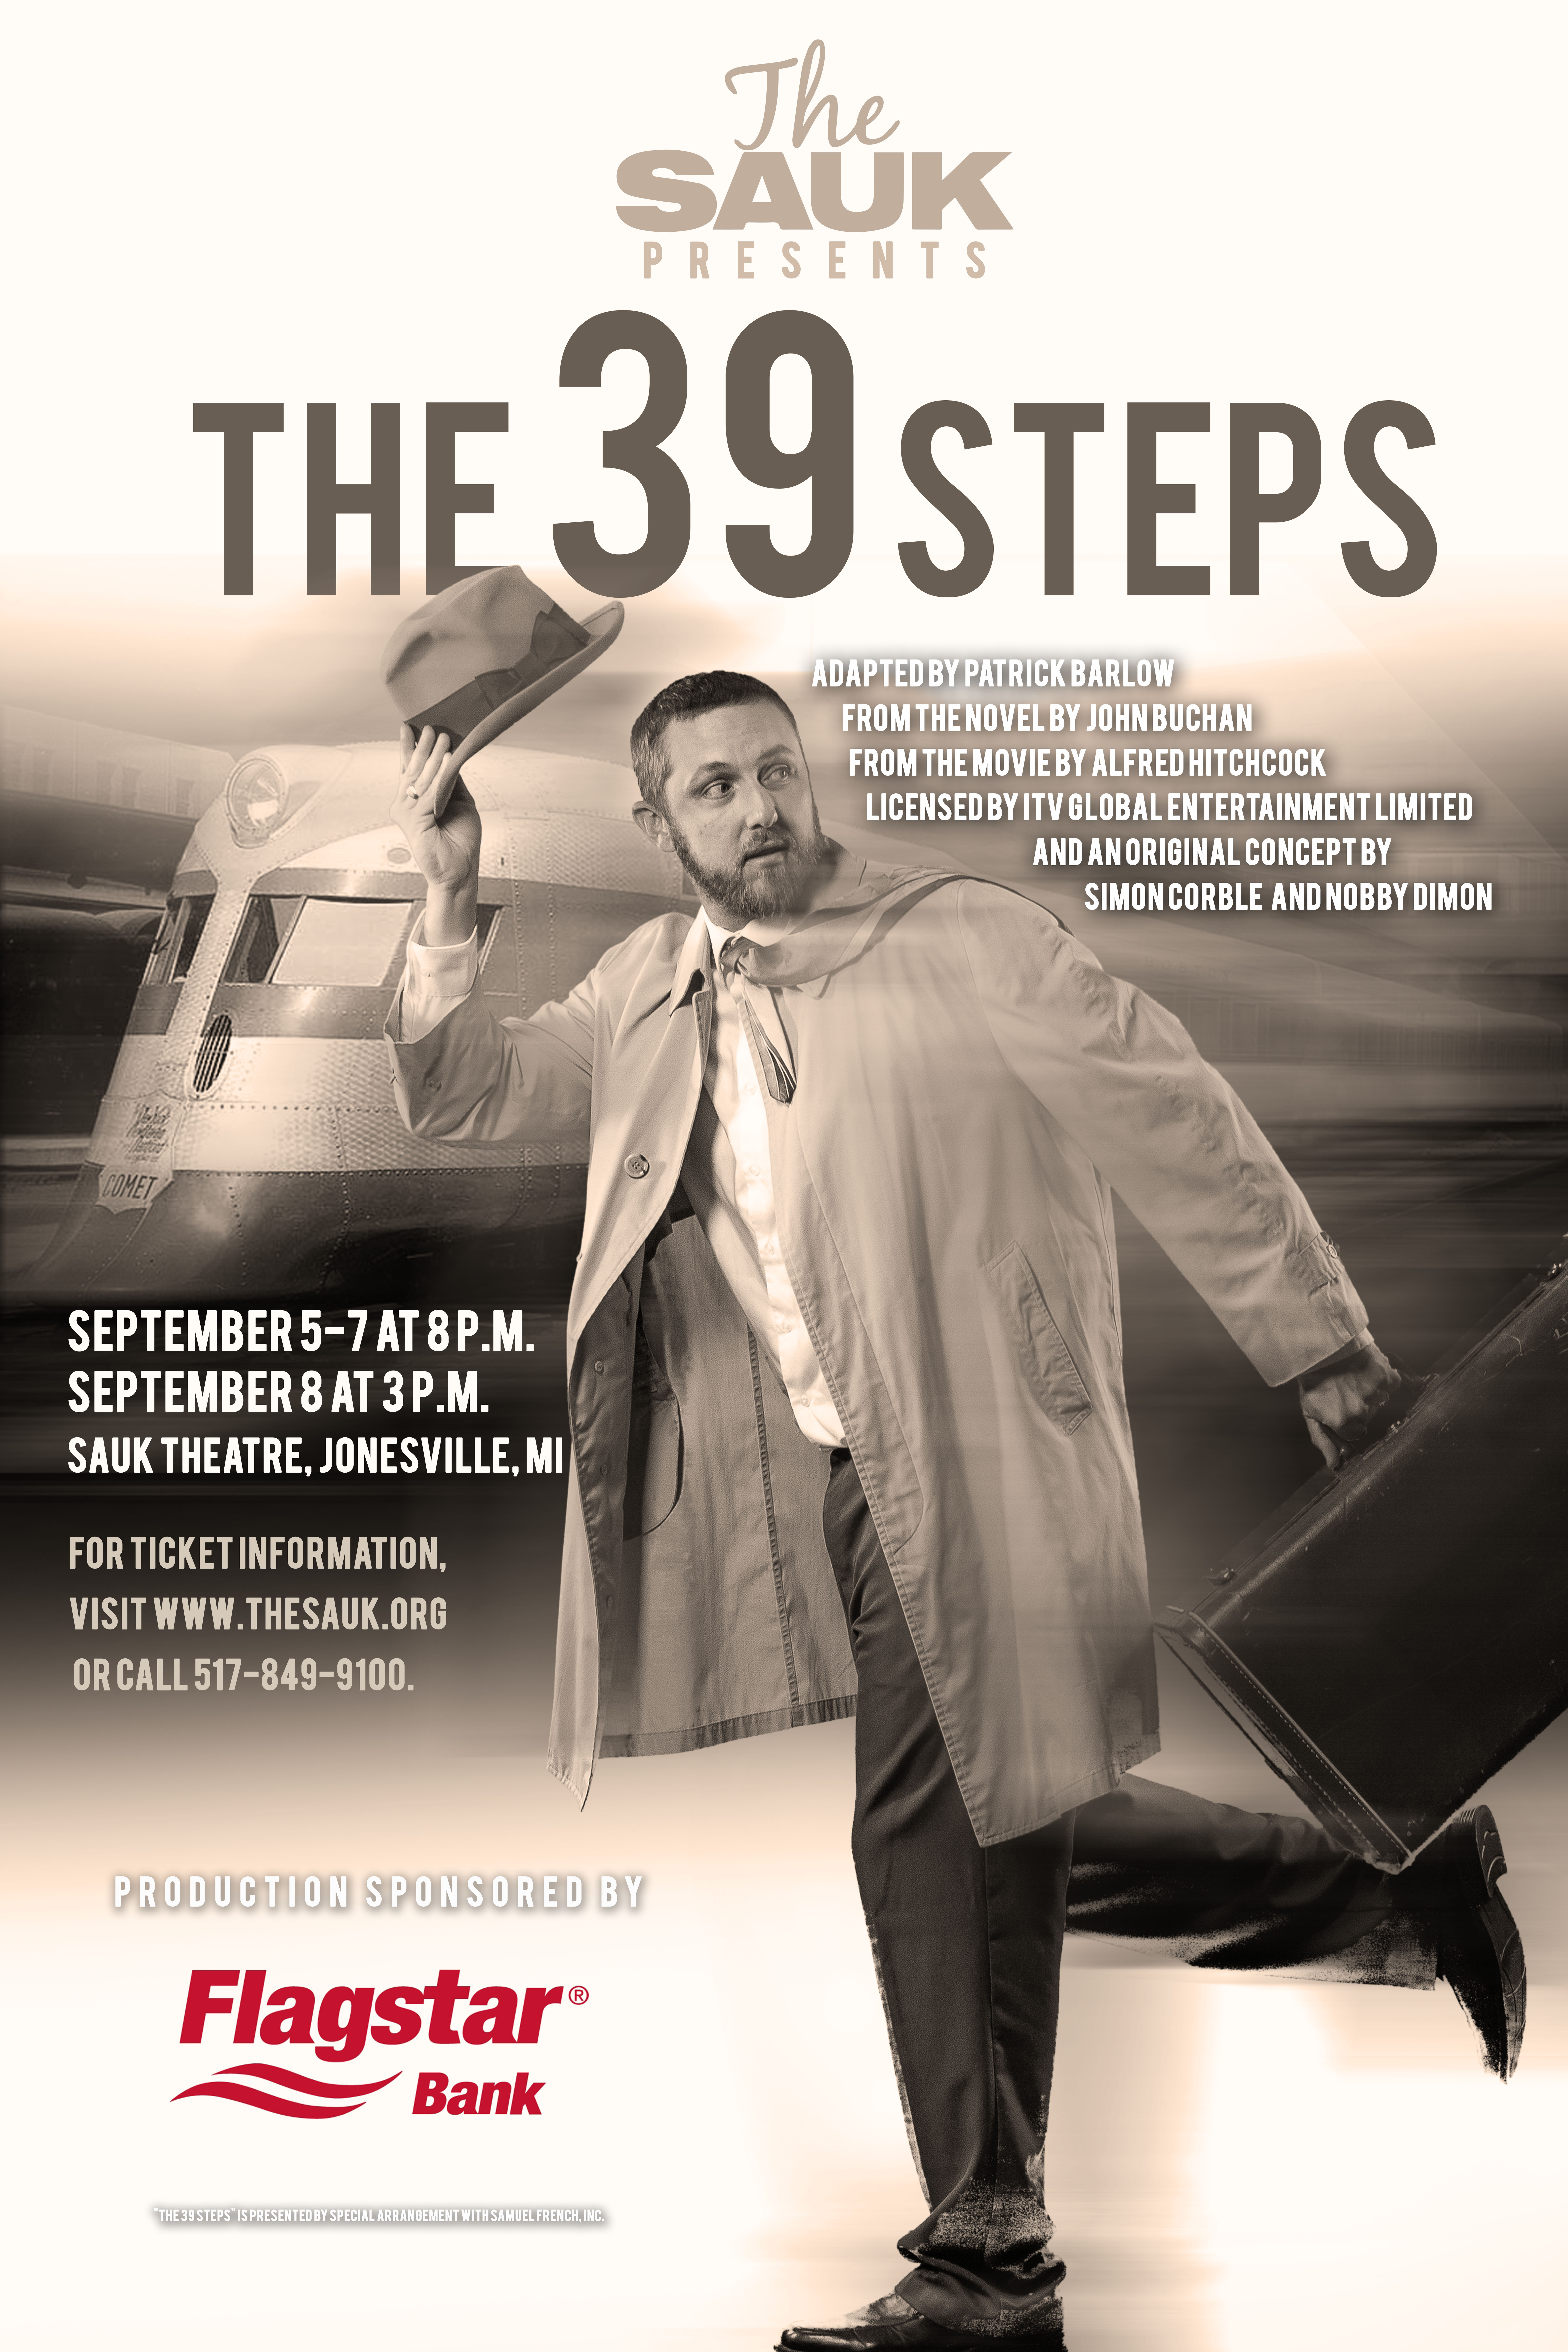 Cast Announced For THE 39 STEPS At The Sauk 